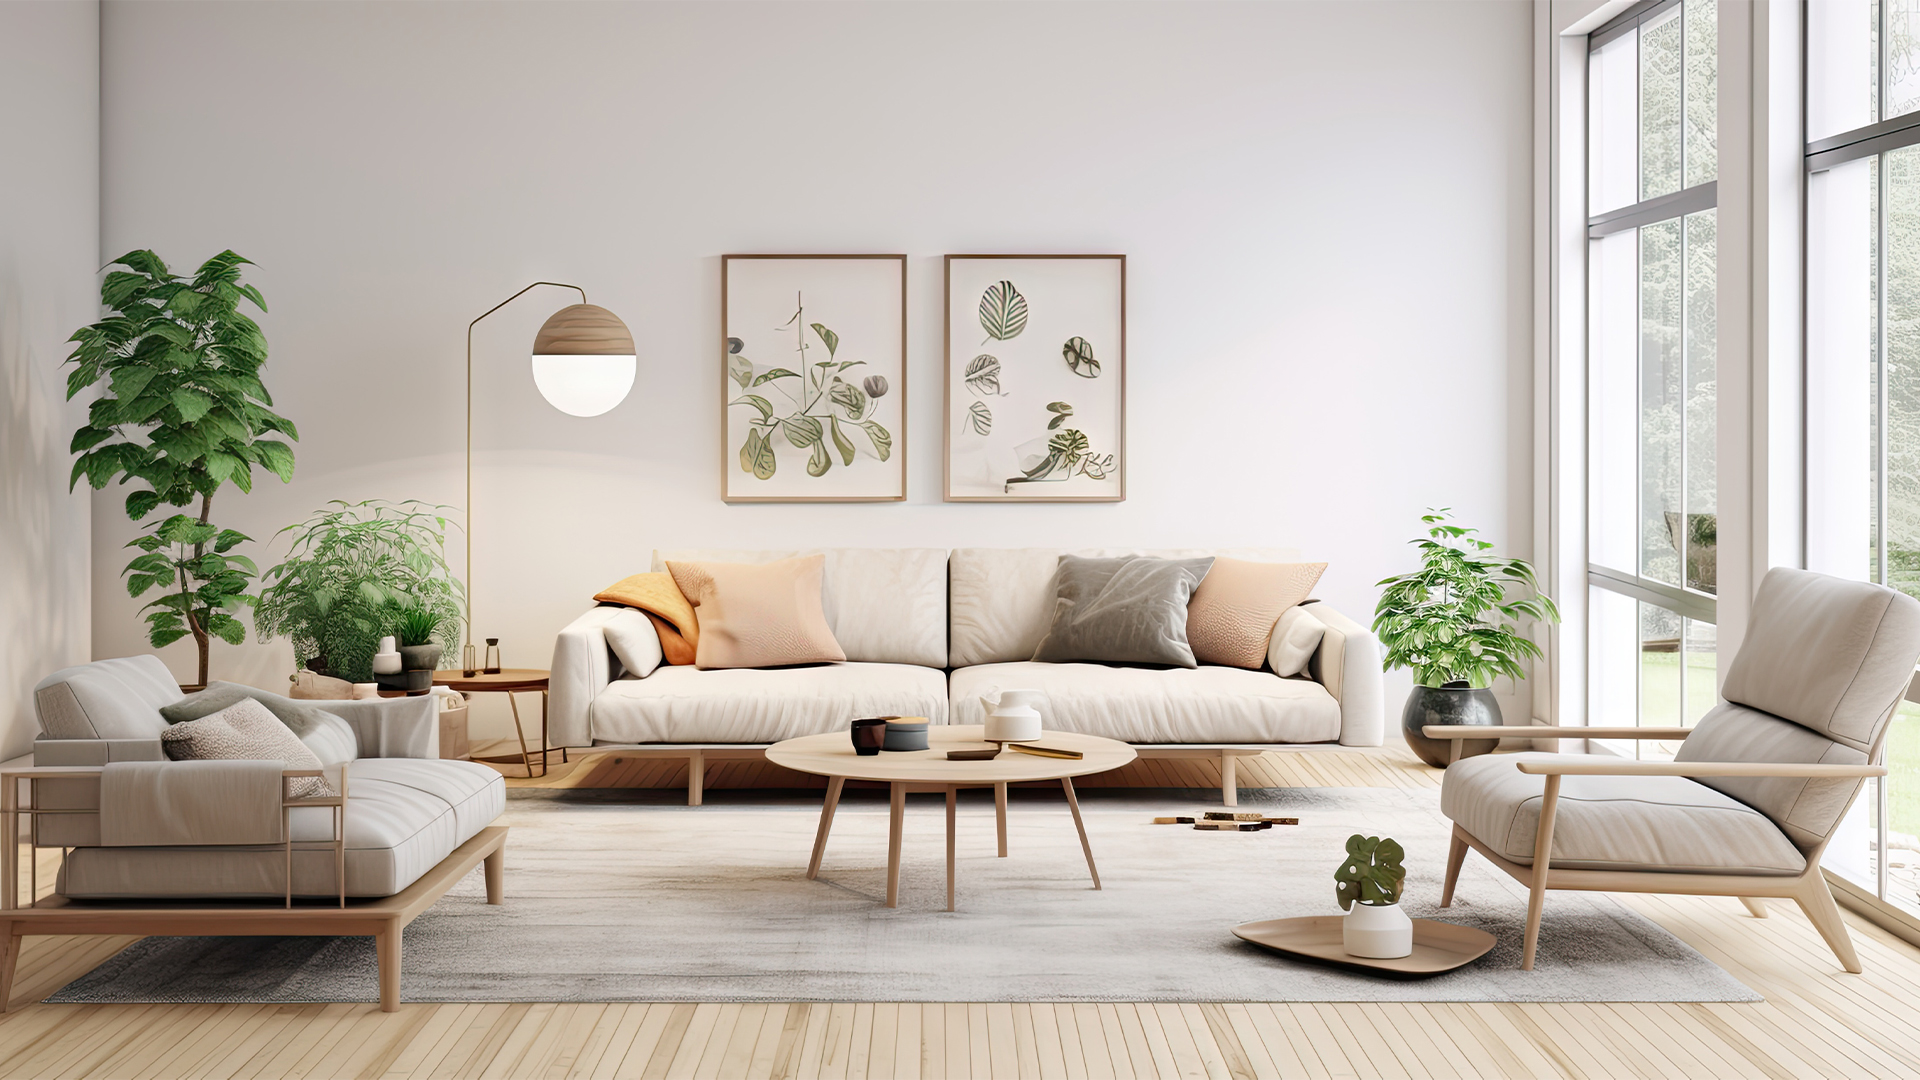 Modern Scandinavian home interior design characterized by an elegant living room featuring a comfortable sofa